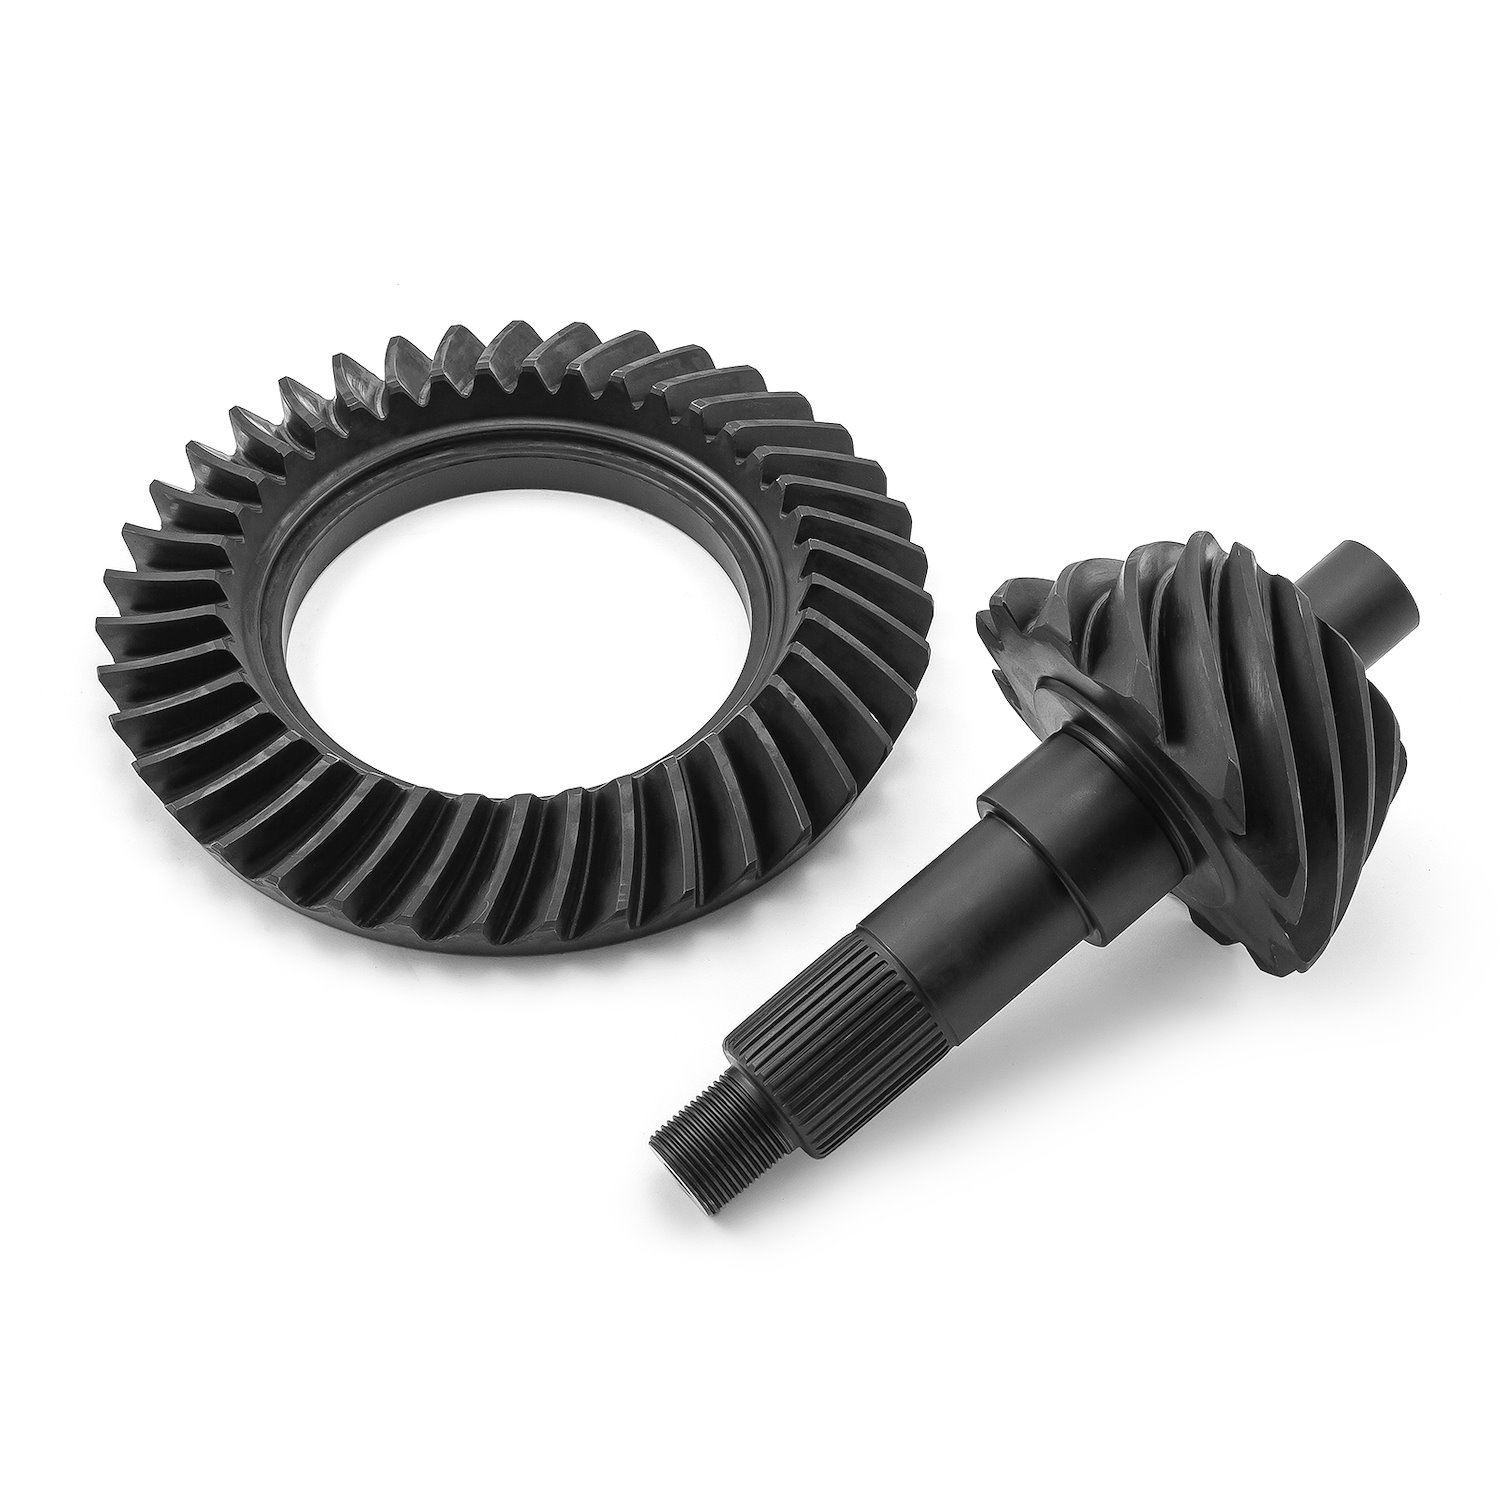 PCE211.1043 Ford 9 in. 35 Spline 3.89:1 Ratio Ring and Pinion Gears Set 8620